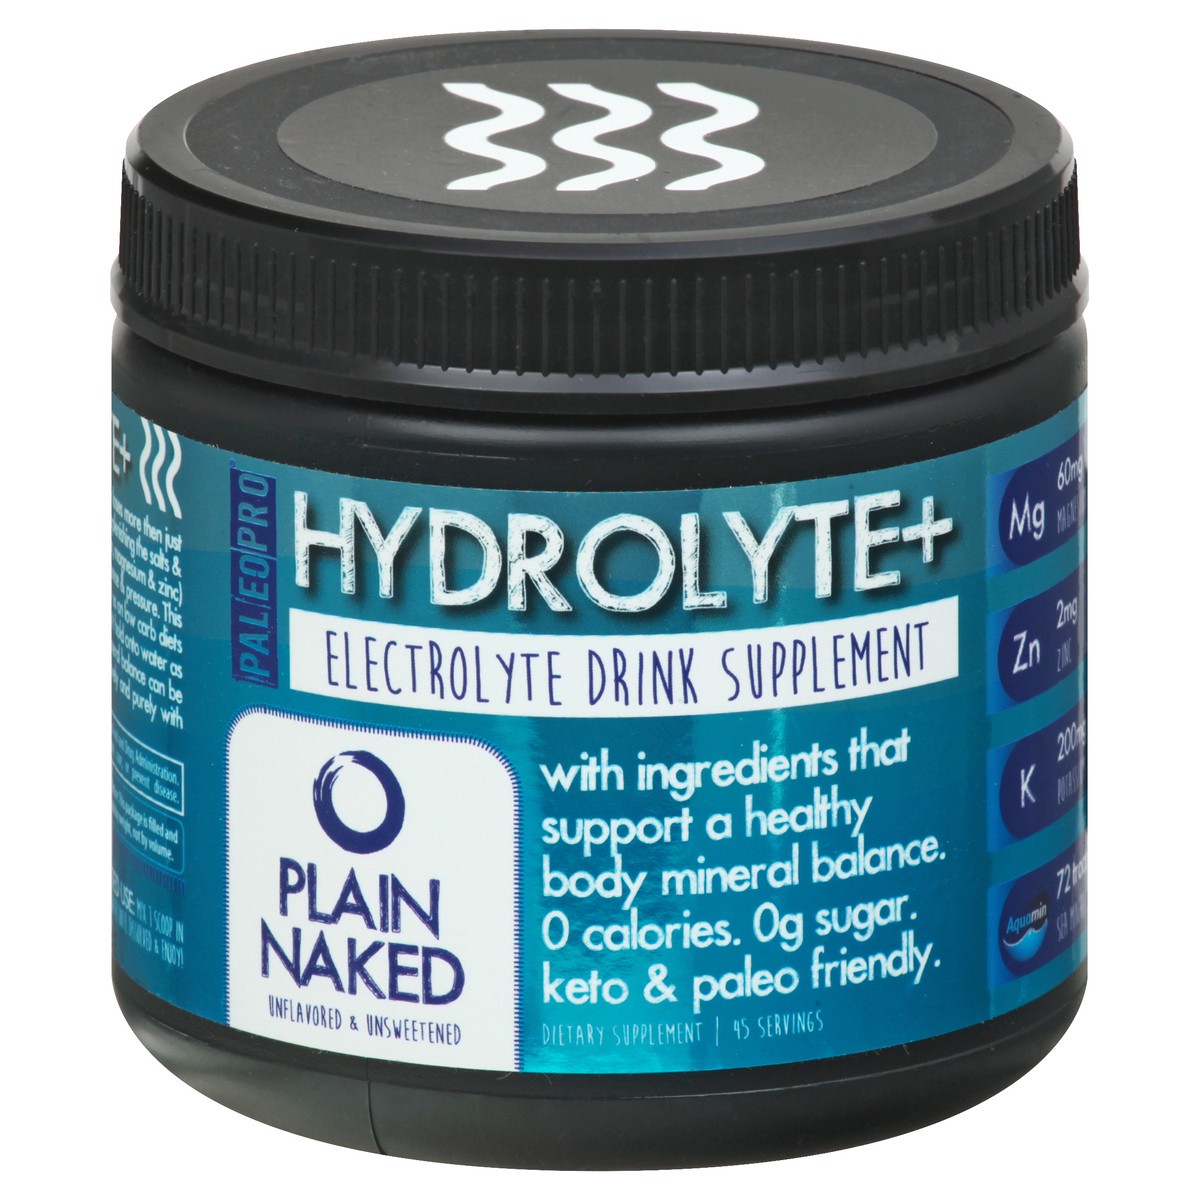 slide 13 of 13, Hydrolyte + Electrolyte Unflavored & Unsweetened Plain Naked Drink Supplement 1 ea, 6.3 oz